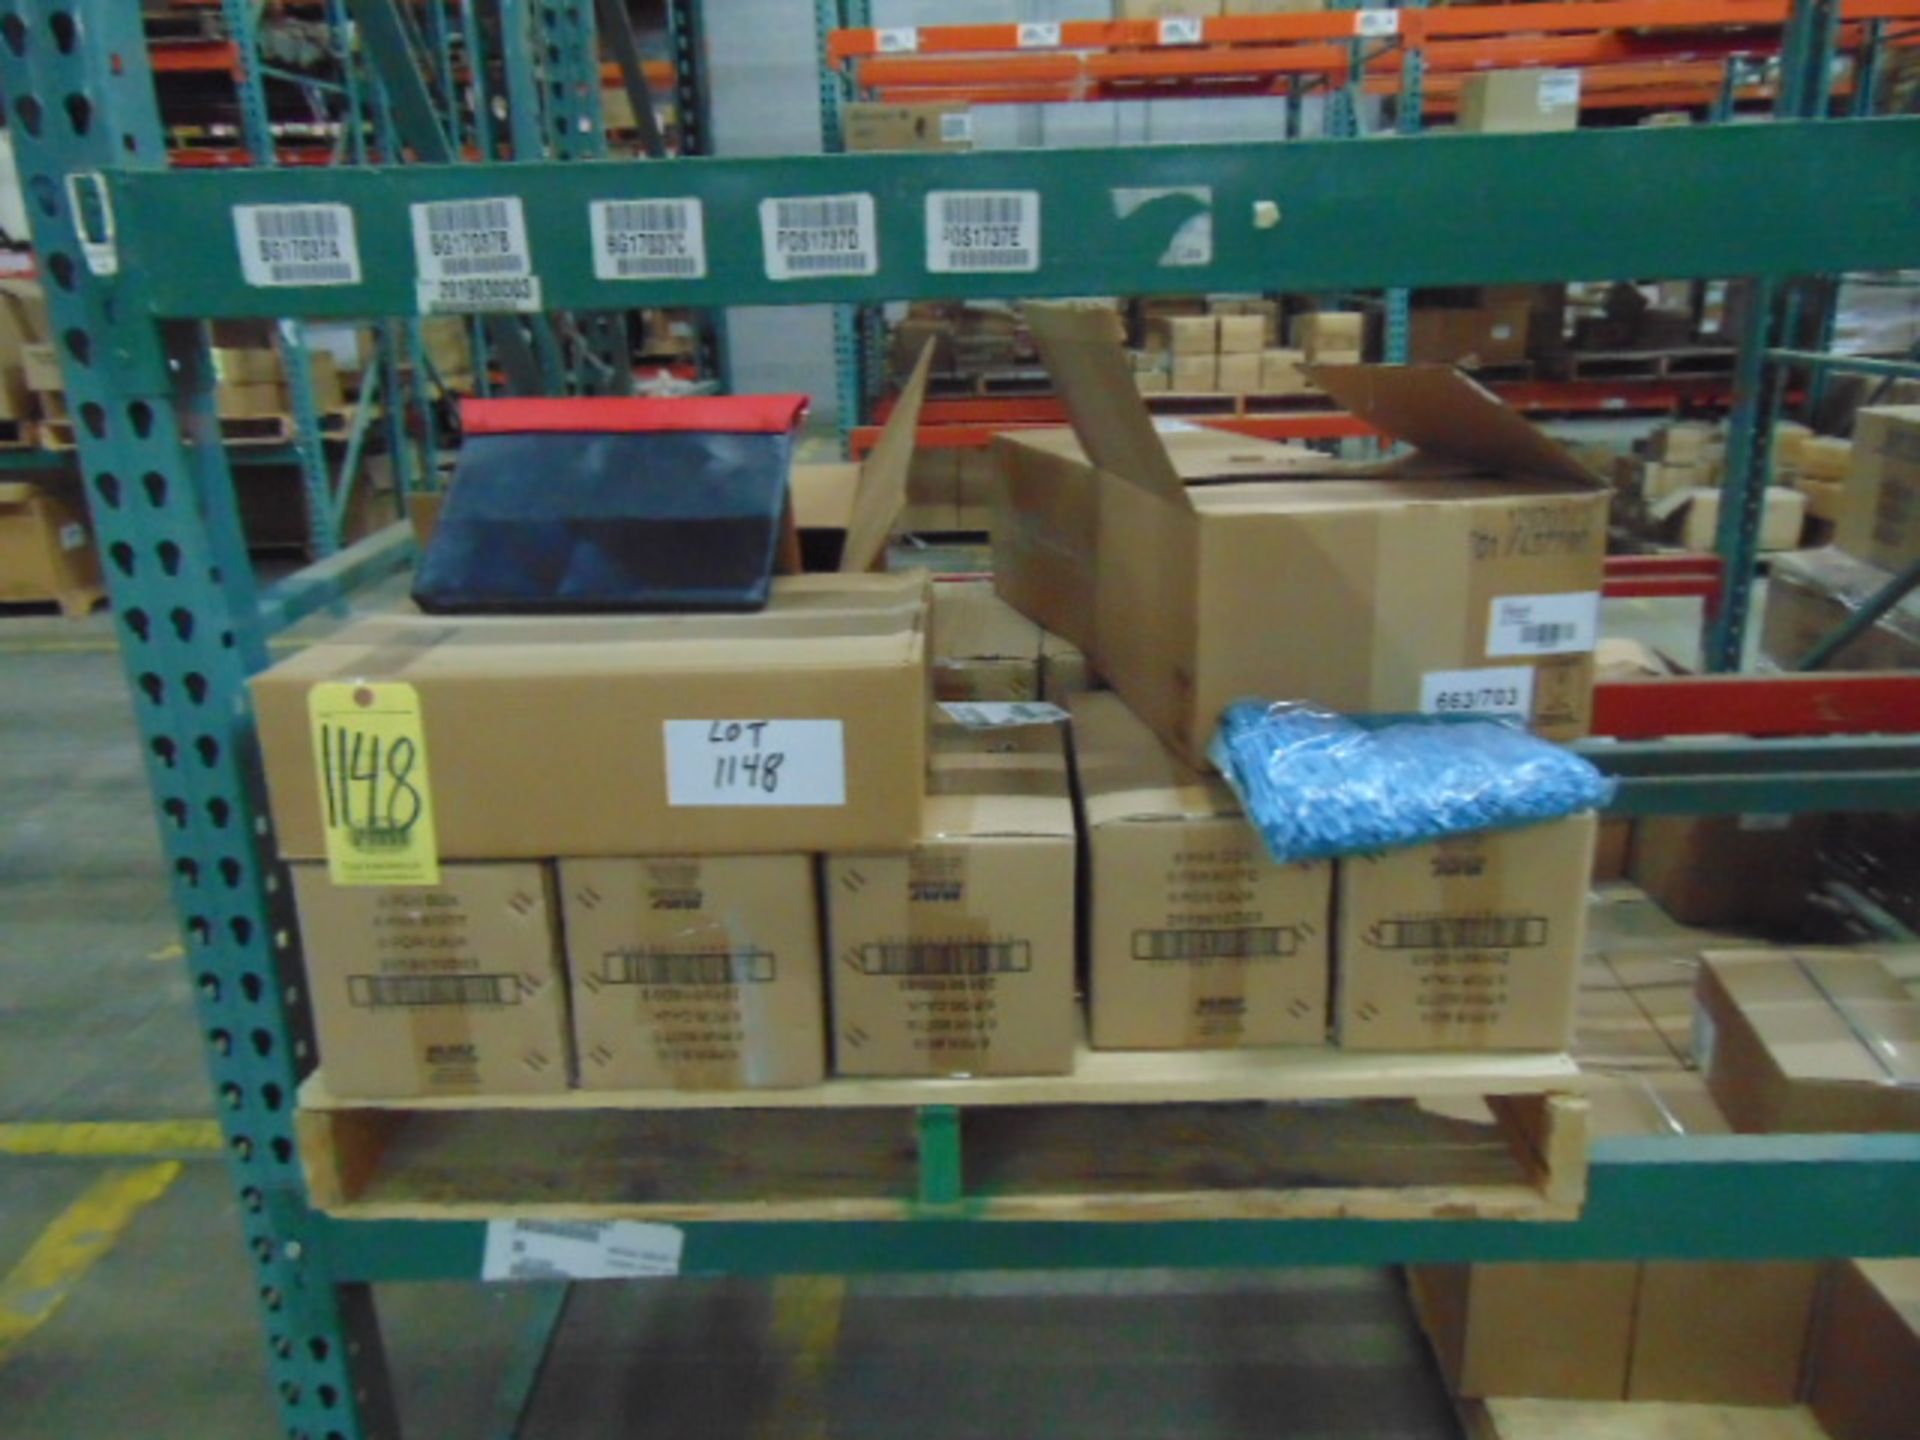 LOT CONSISTING OF: key cabinets, money wrappers, bookends, fraud stopper bags, thermal rolls (on